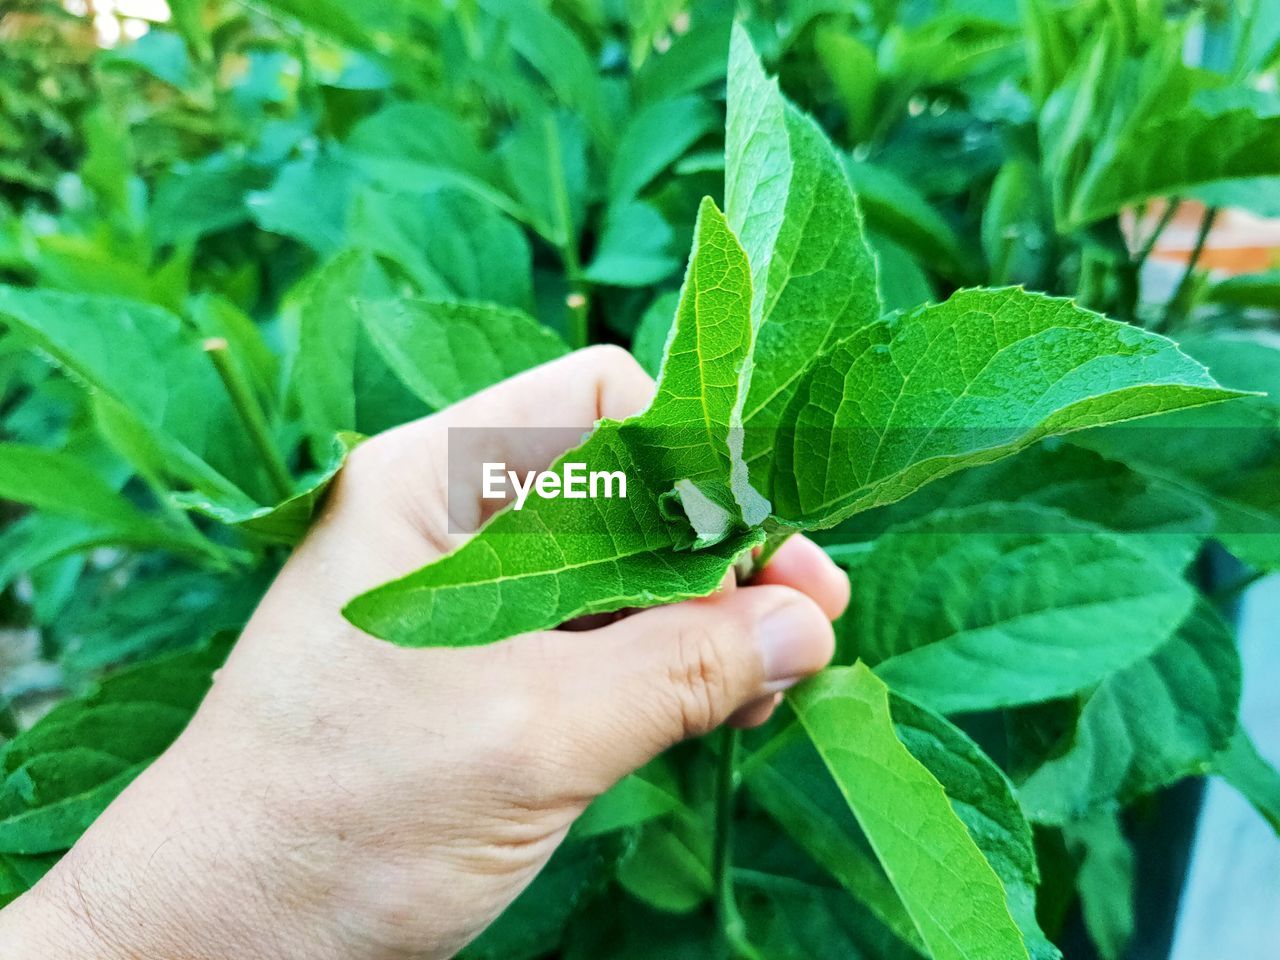 hand, plant part, leaf, green, plant, growth, one person, holding, nature, food, agriculture, food and drink, close-up, flower, freshness, day, produce, outdoors, healthy eating, lifestyles, finger, adult, vegetable, organic, focus on foreground, herb, gardening, wellbeing, crop